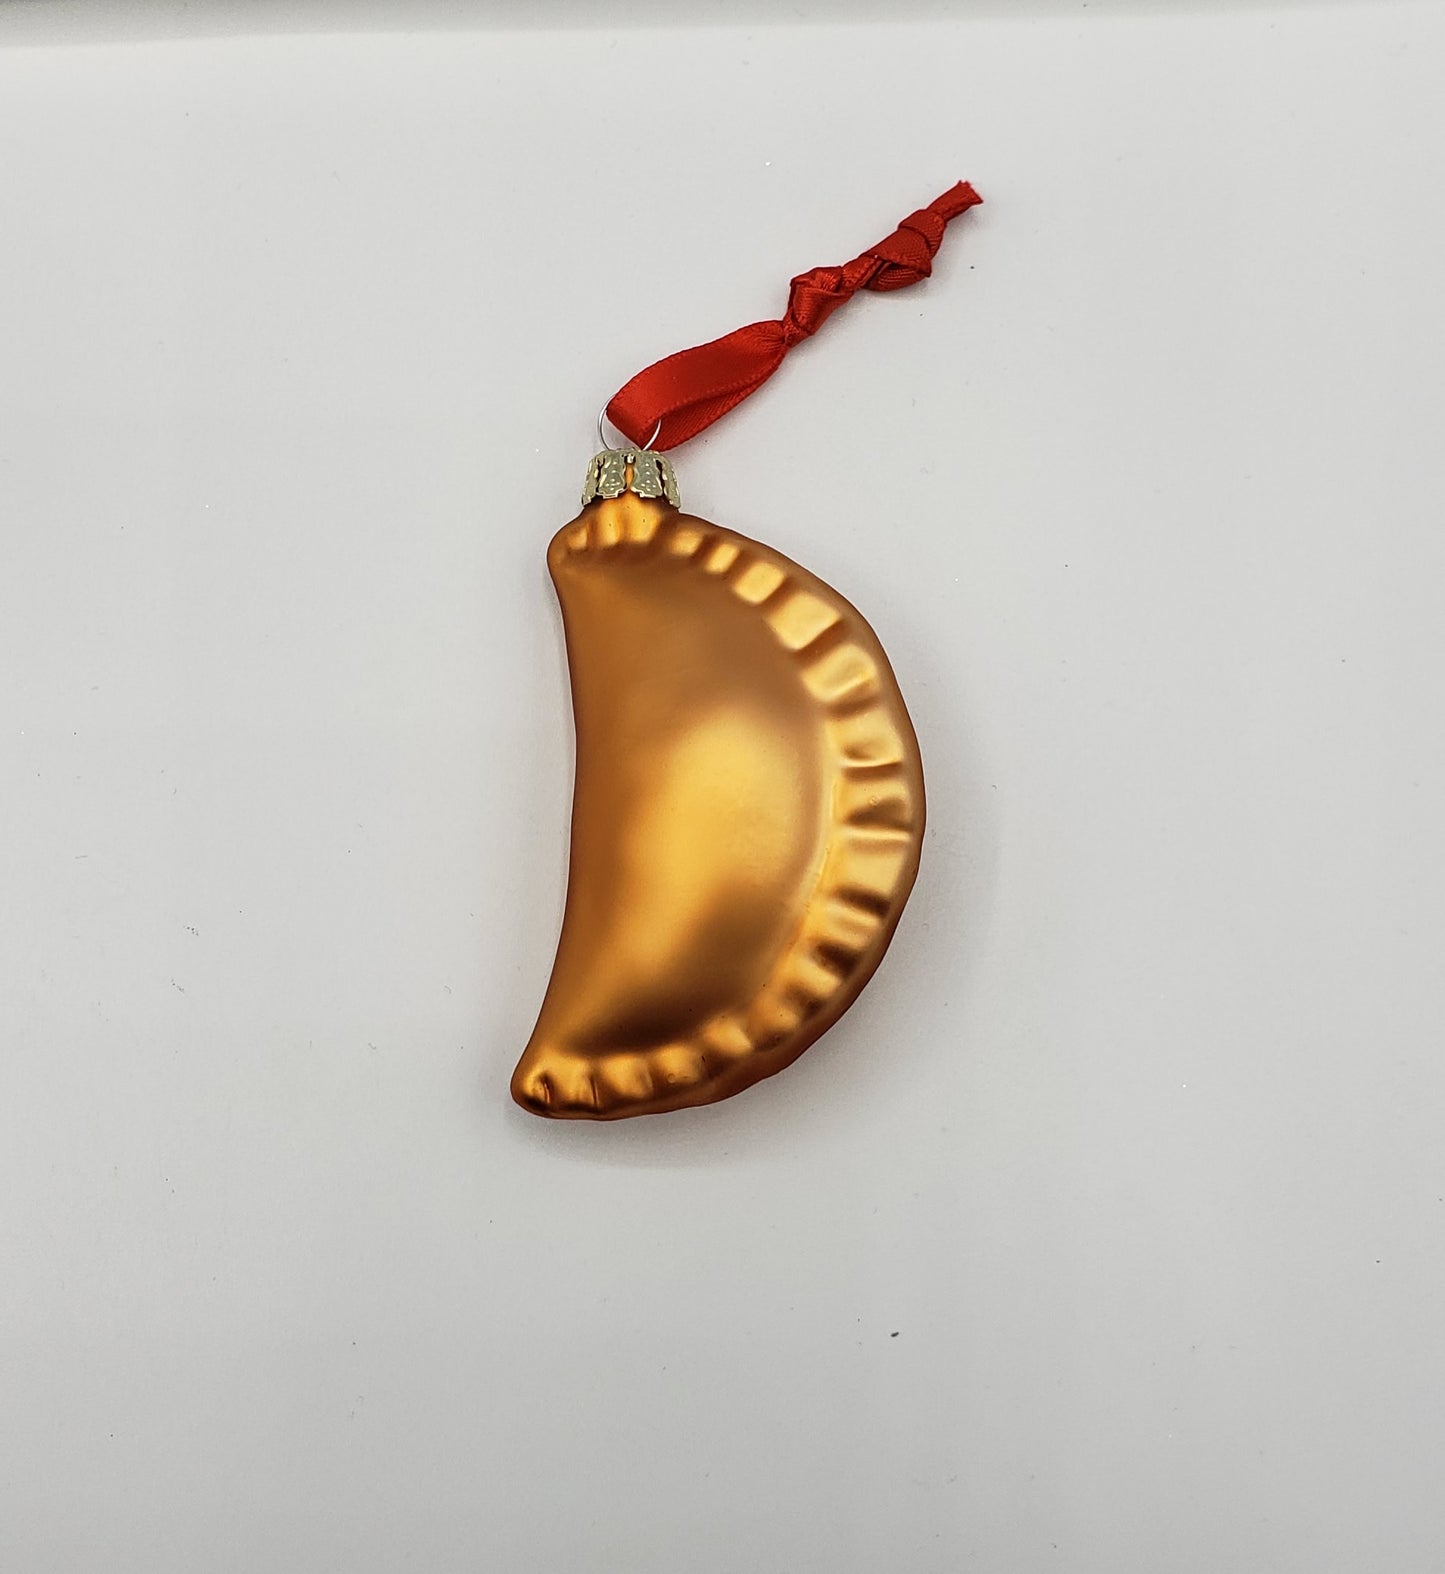 Case of Pierogi Shaped Ornaments - Whole Sale Only